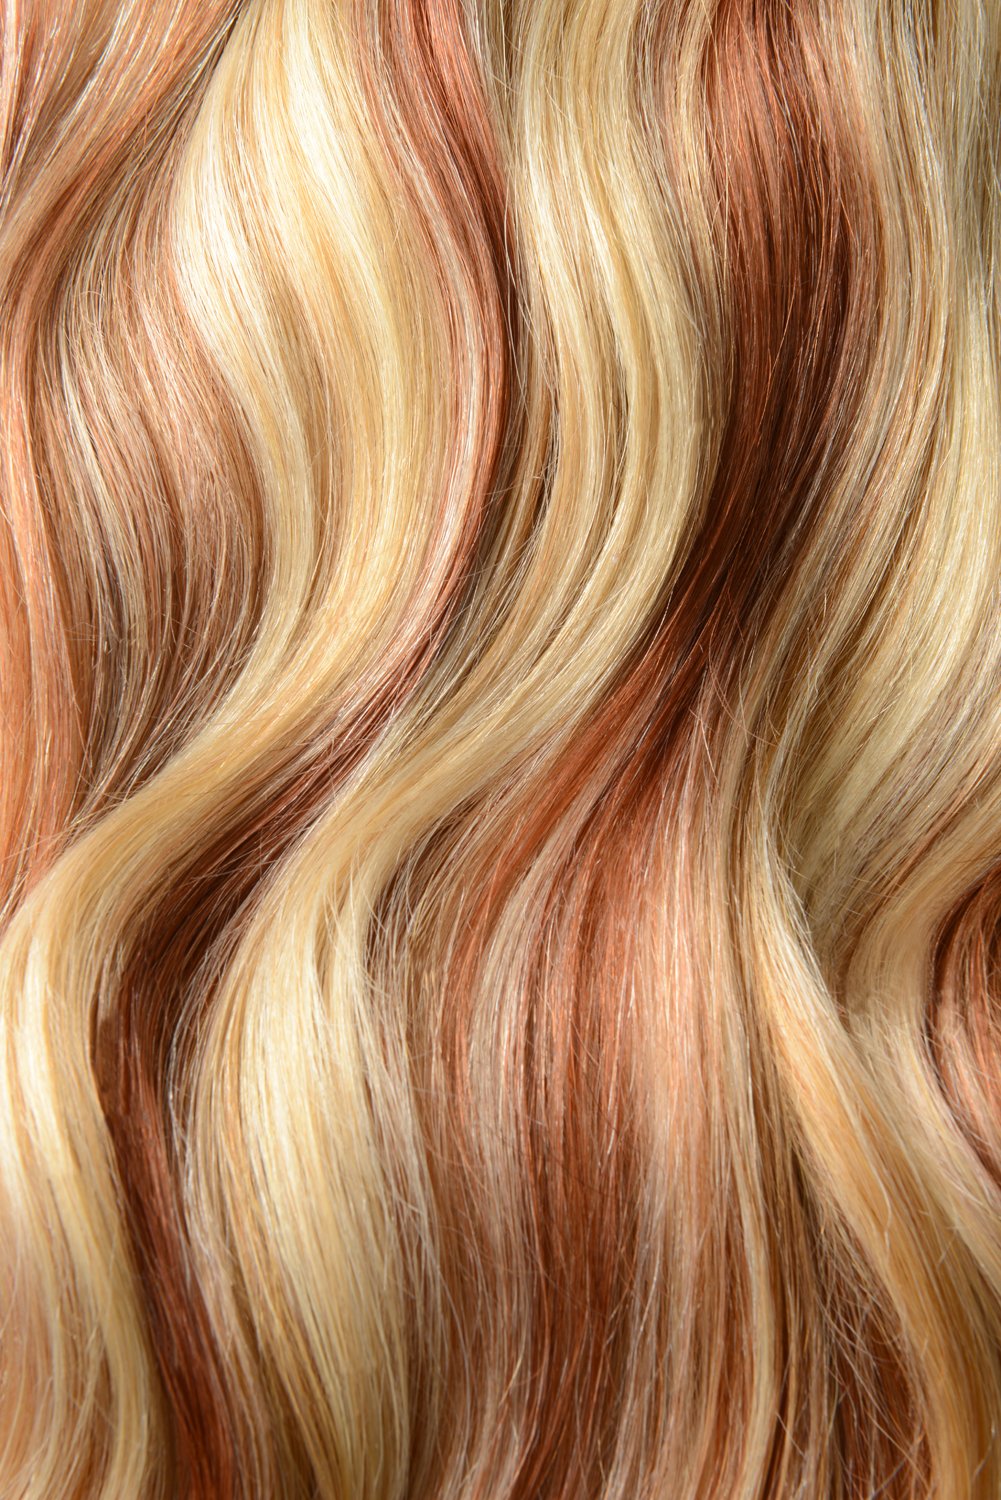 Double Wefted Full Head Remy Clip in Human Hair Extensions - Strawberry Blonde/Auburn/Bleach Blonde Mix (#27/33/613)